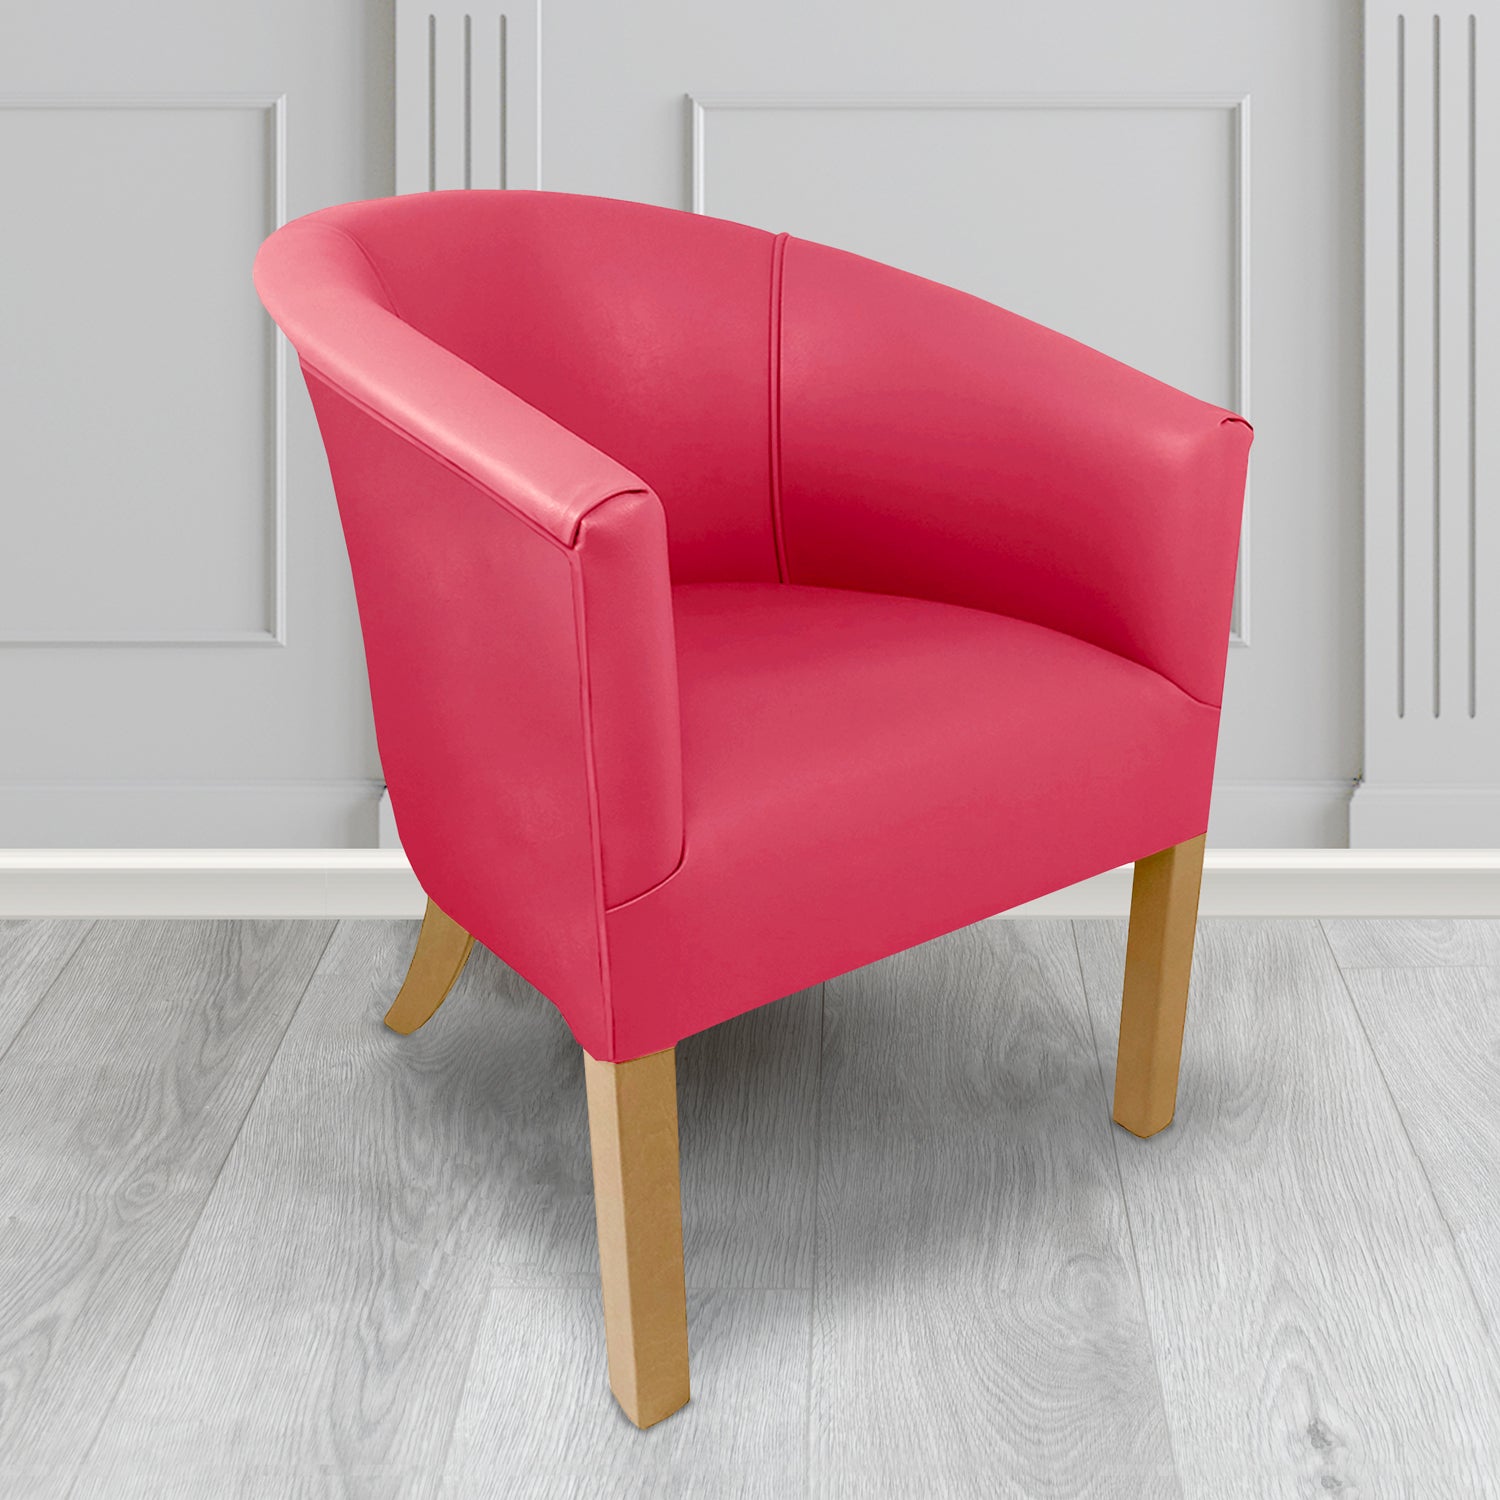 Lewisham Tub Chair in Agua Paint Pot Pink Crib 5 Faux Leather - Antimicrobial, Stain Resistant & Waterproof - The Tub Chair Shop